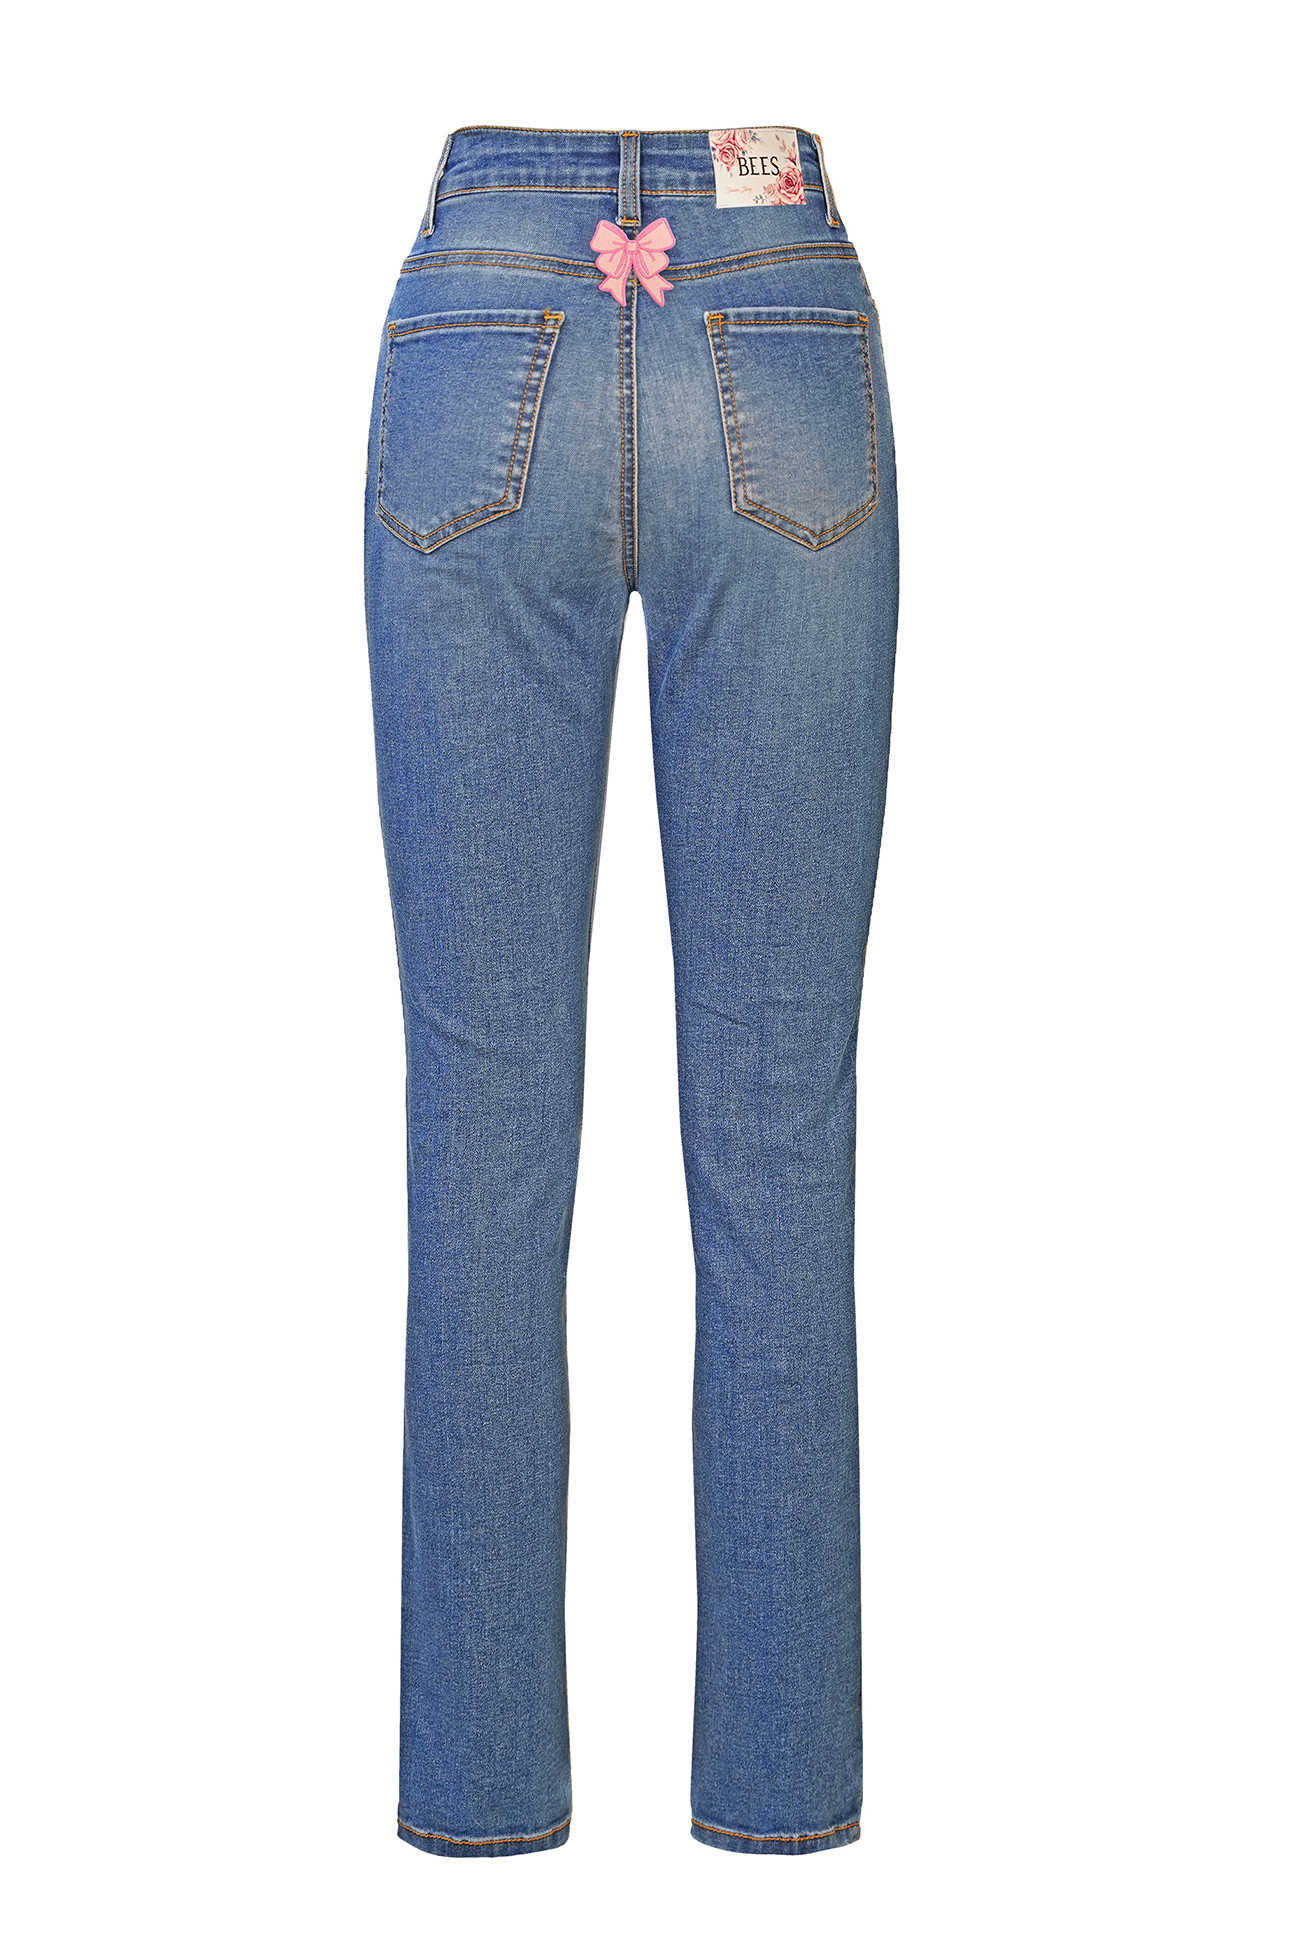 Bees - Iconic Jeans with bow, Denim, large image number 1